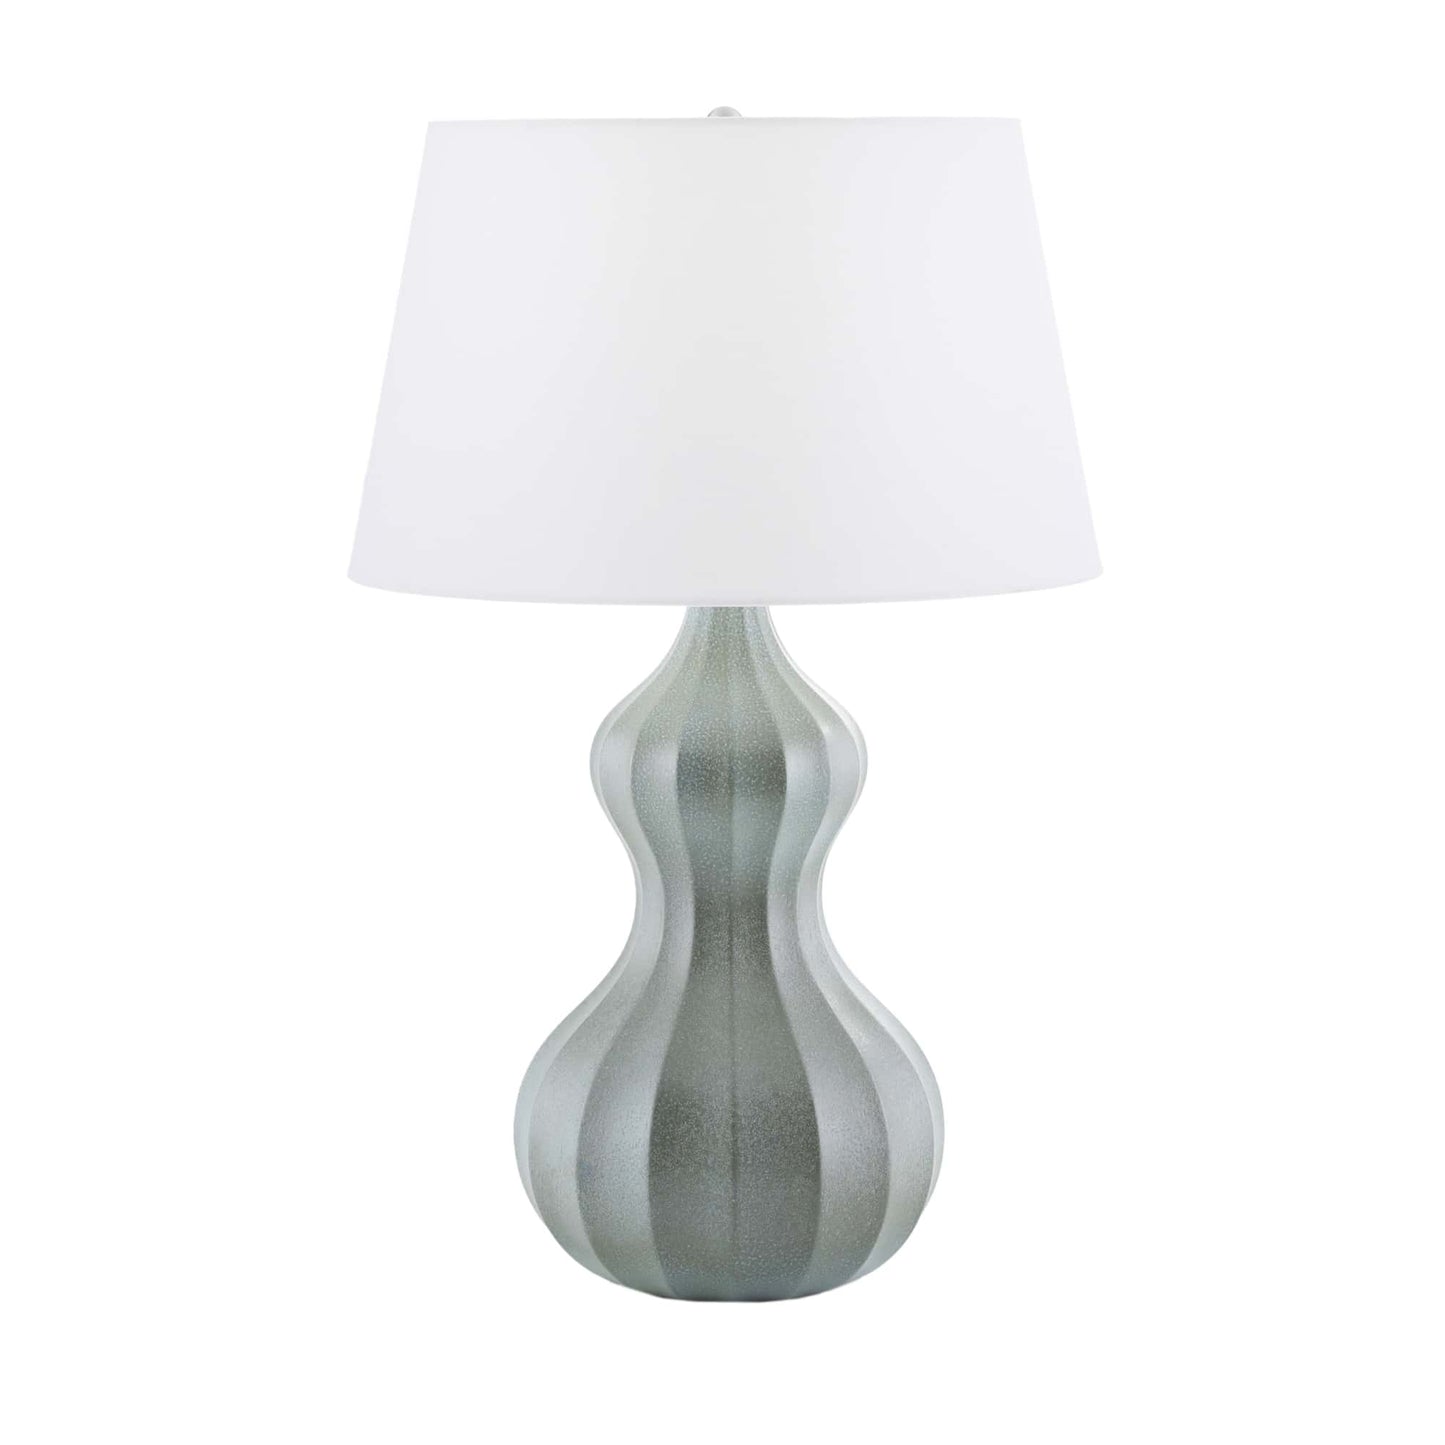 Shirley Lamp - Seafoam Reactive Porcelain Table Lamp with Cactus-Inspired Design